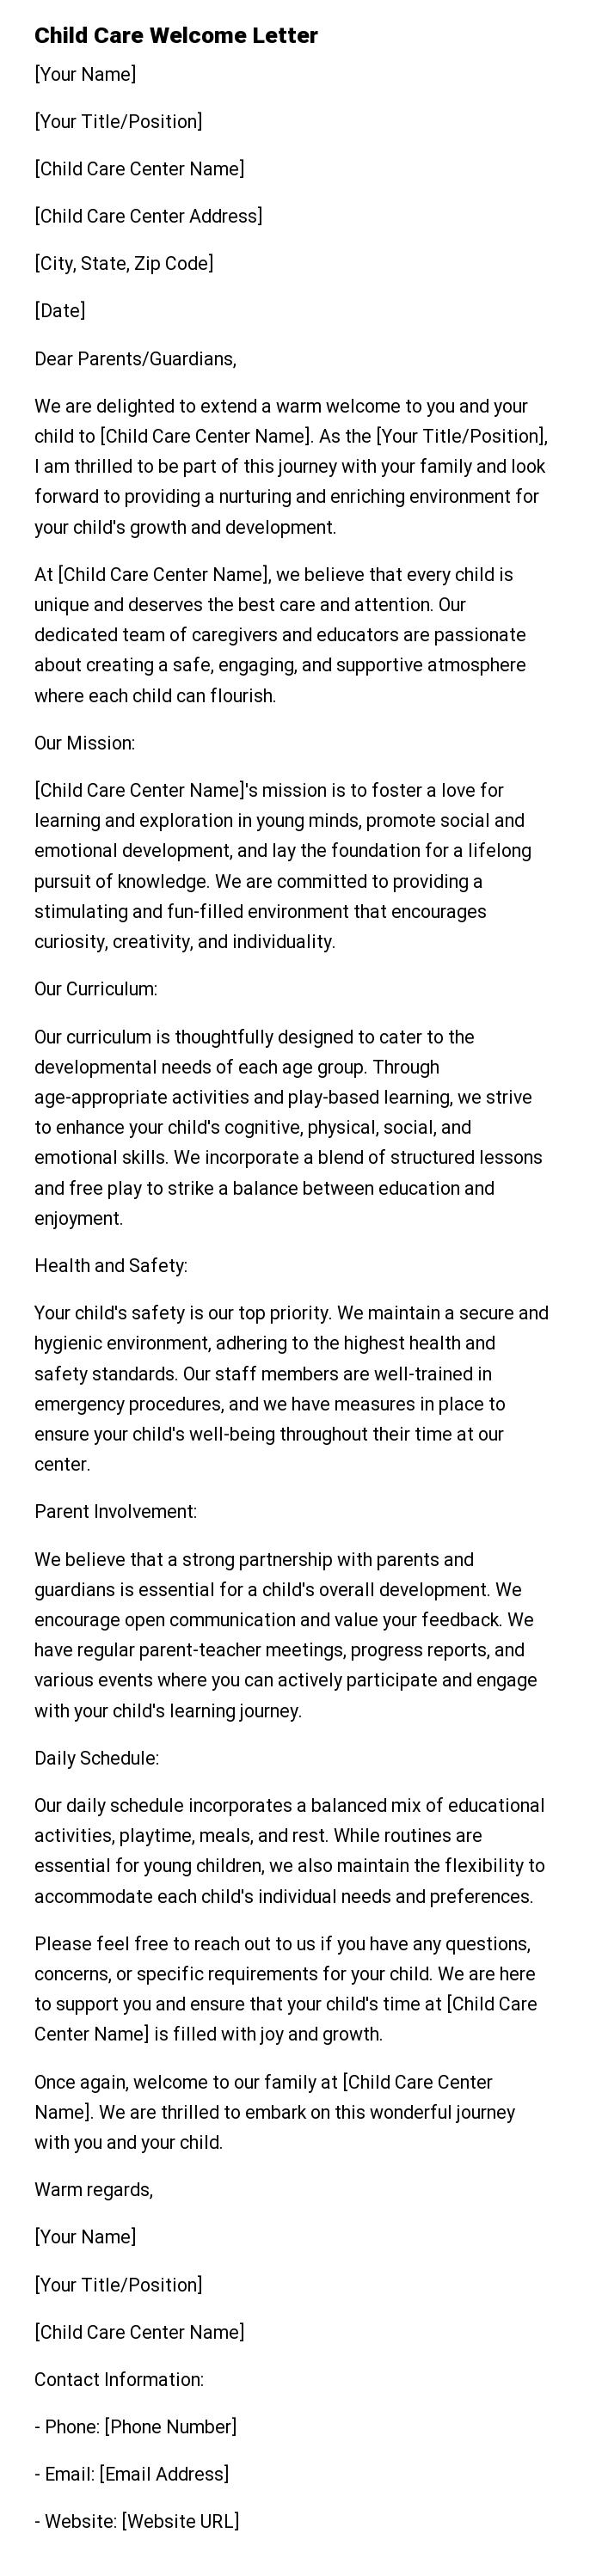 Child Care Welcome Letter